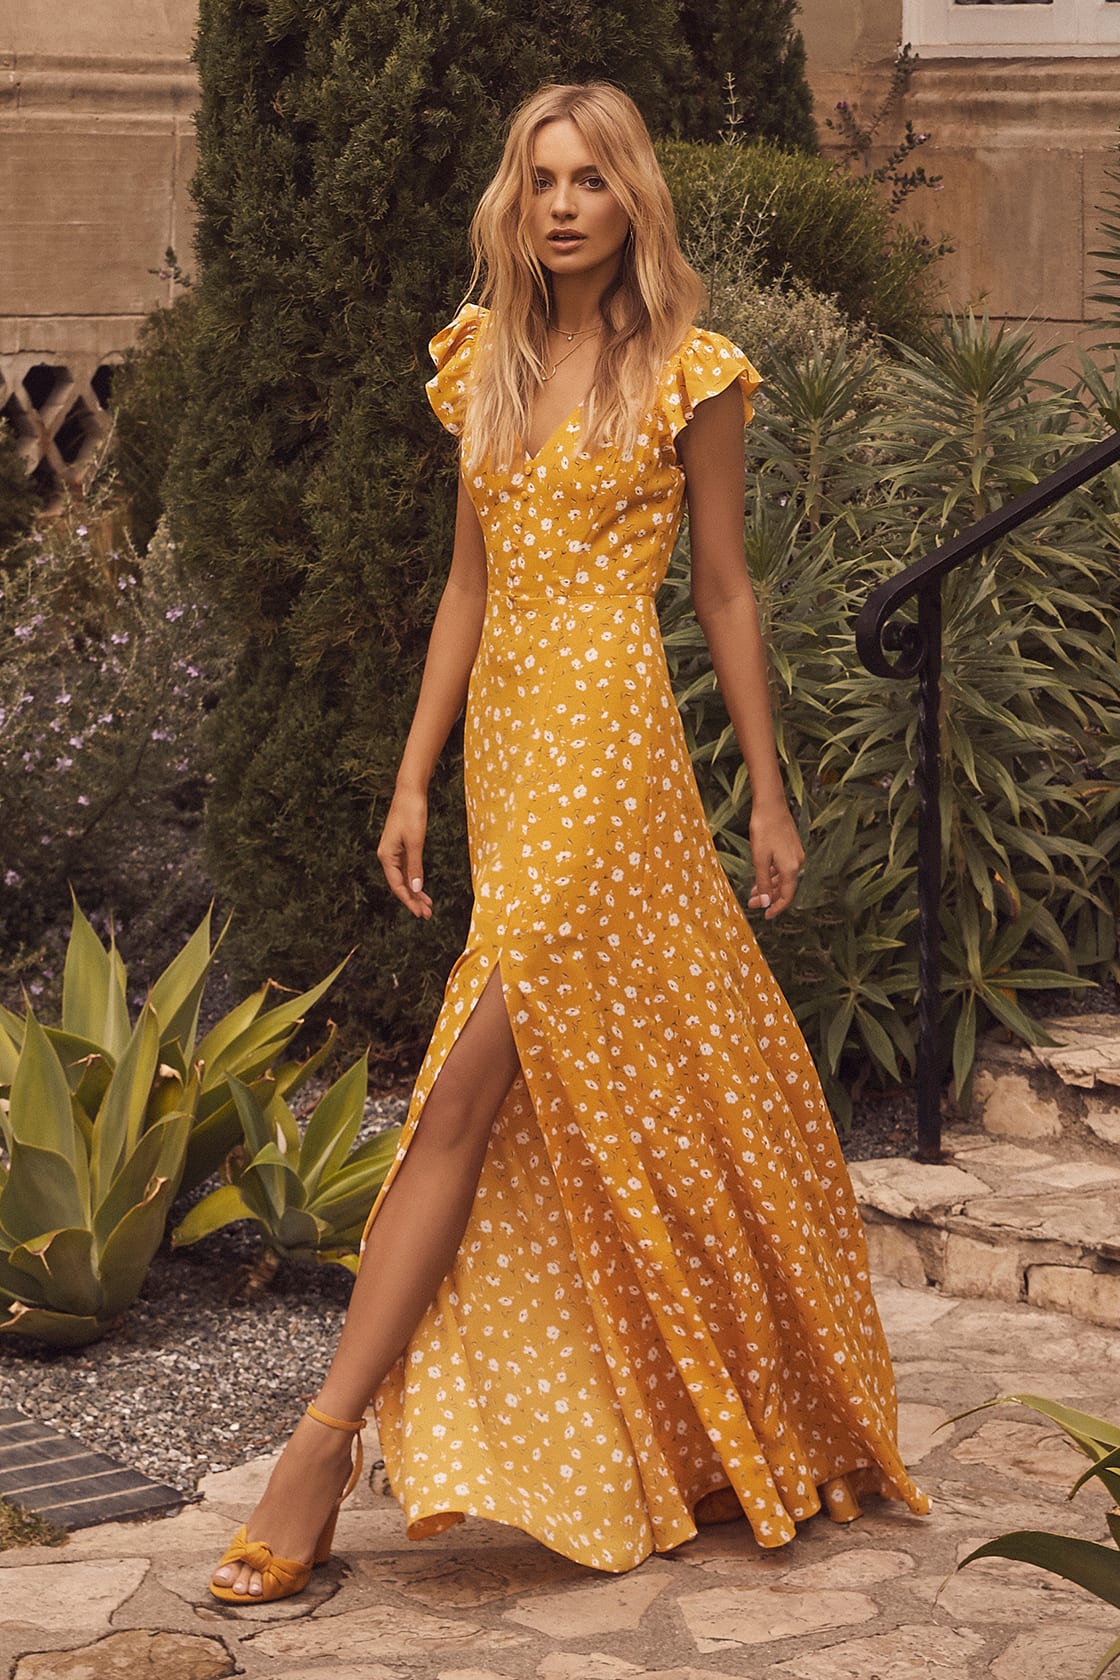 What To Wear To A Summer Wedding: Dresses For Every RSVP - Lulus.com  Fashion Blog